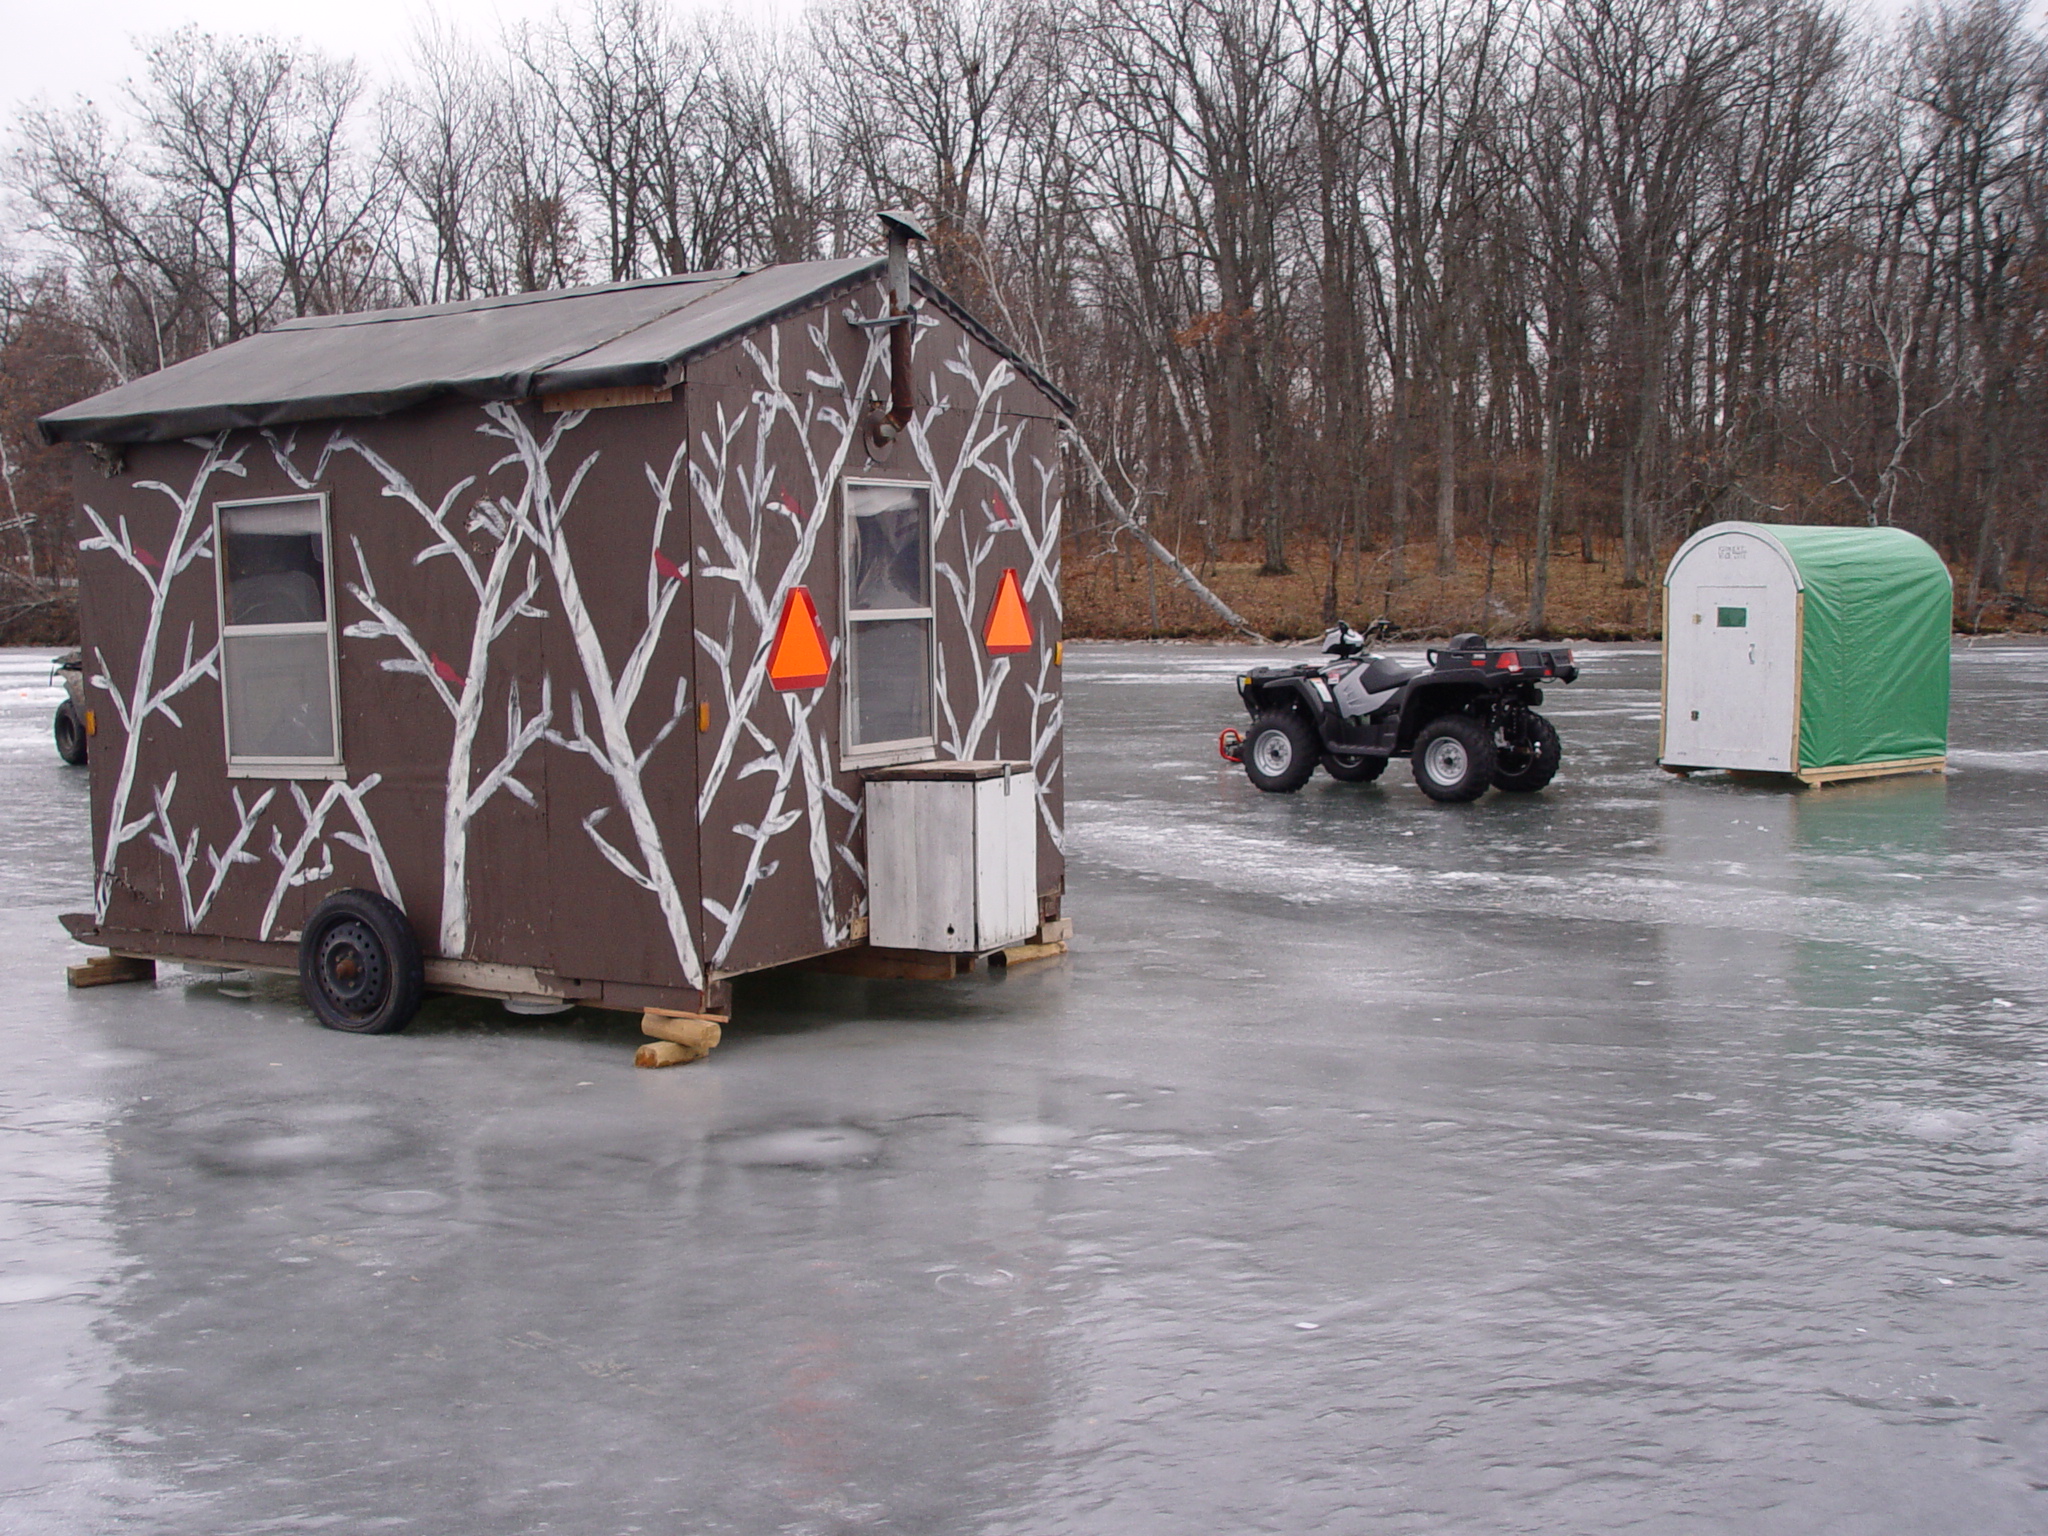 Show some of your homemade equipment for ice fishing - Ice fishing